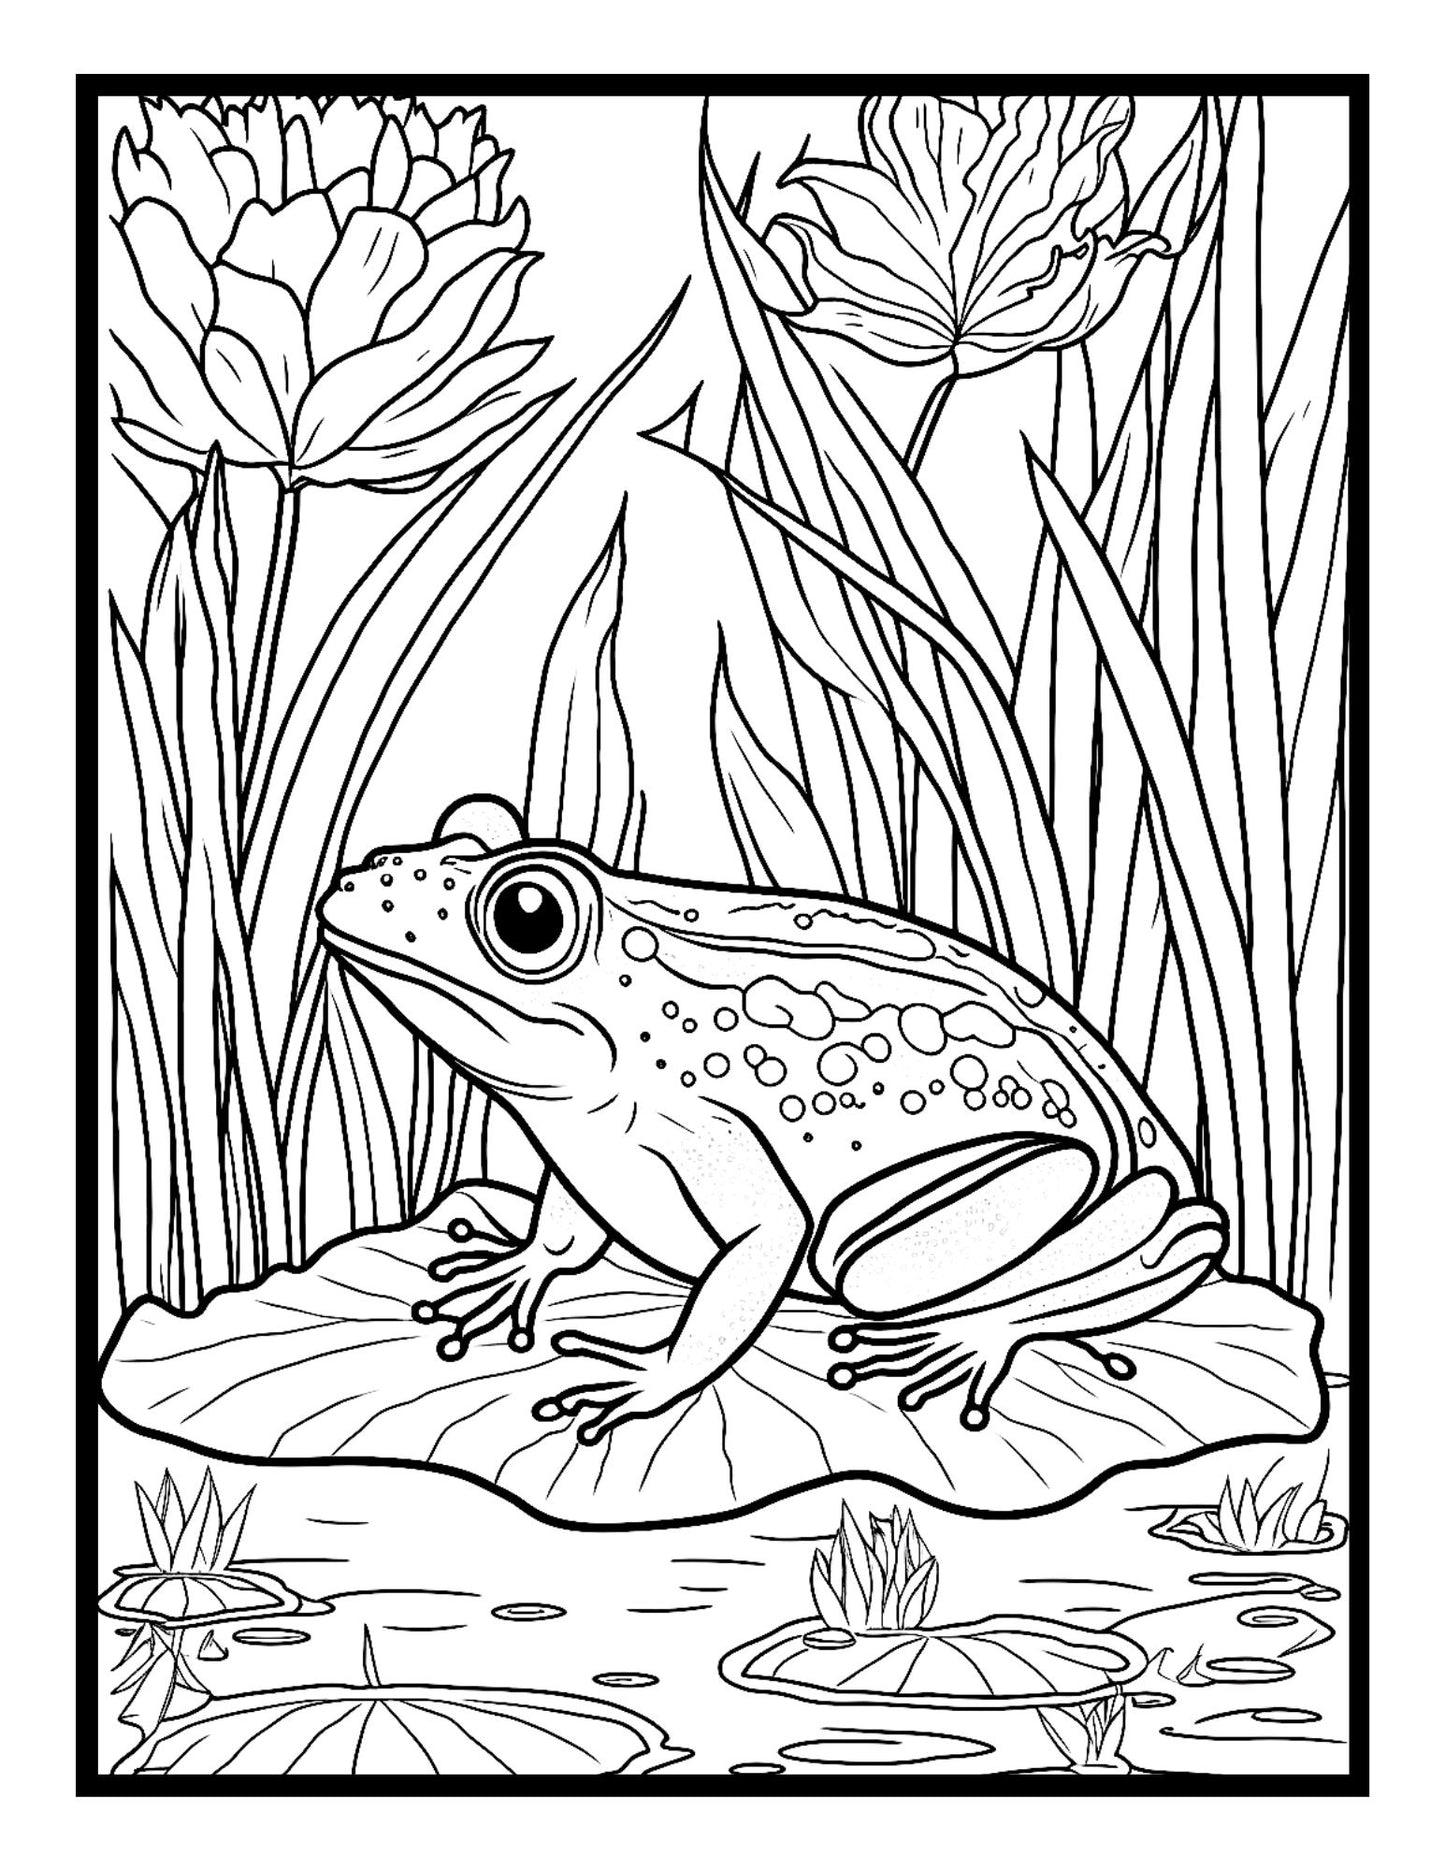 Cute Toad Coloring Book Frog Coloring Book For Adult And Kids Animal Habitat Coloring Jungle Animal Coloring Wild Life Animal Coloring Book